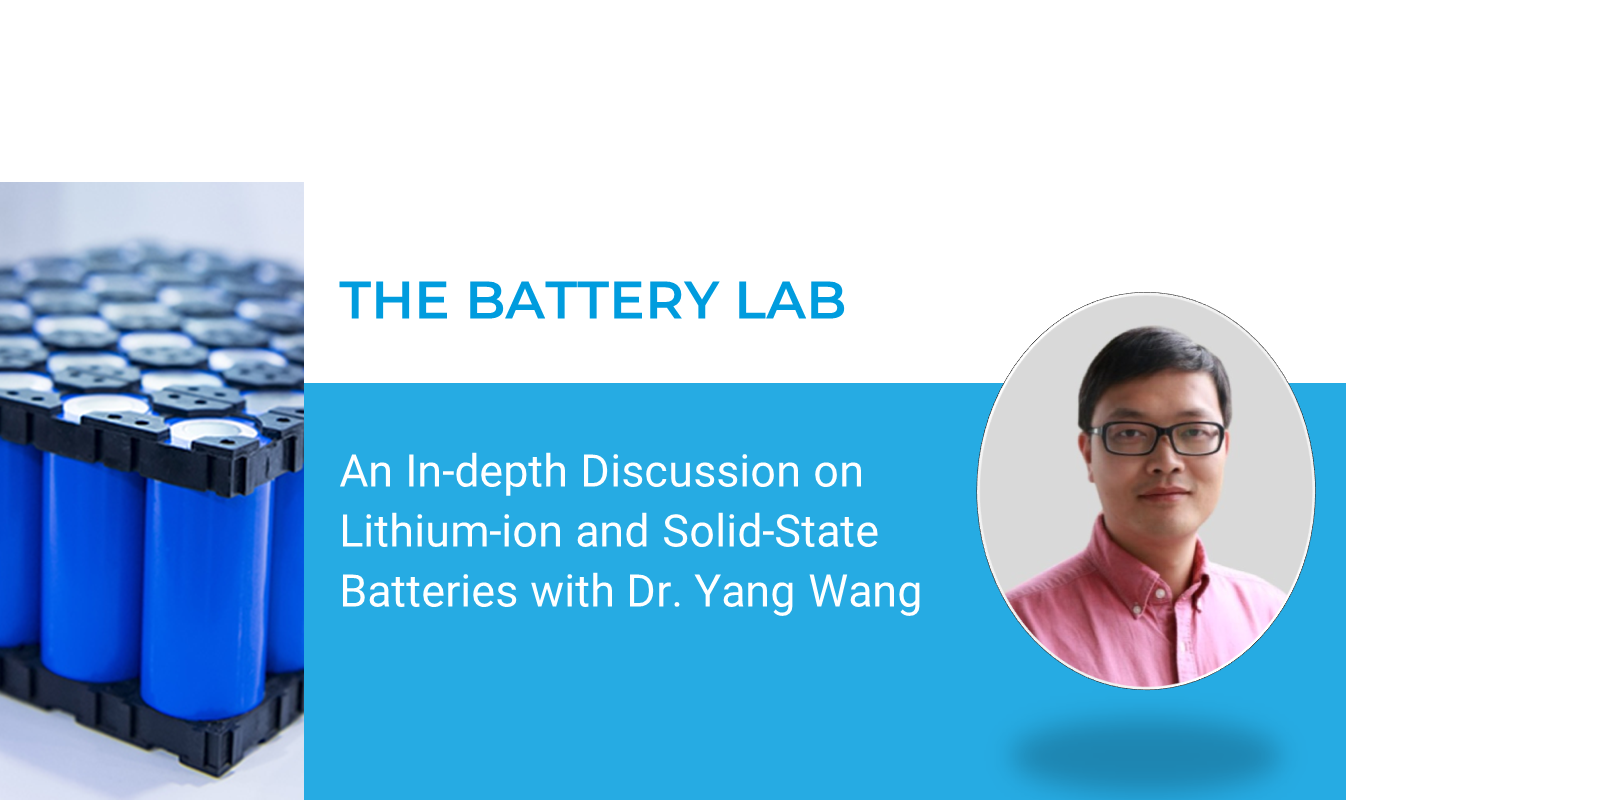 An In-depth Discussion on Lithium-ion and Solid-State Batteries with Dr. Yang Wang